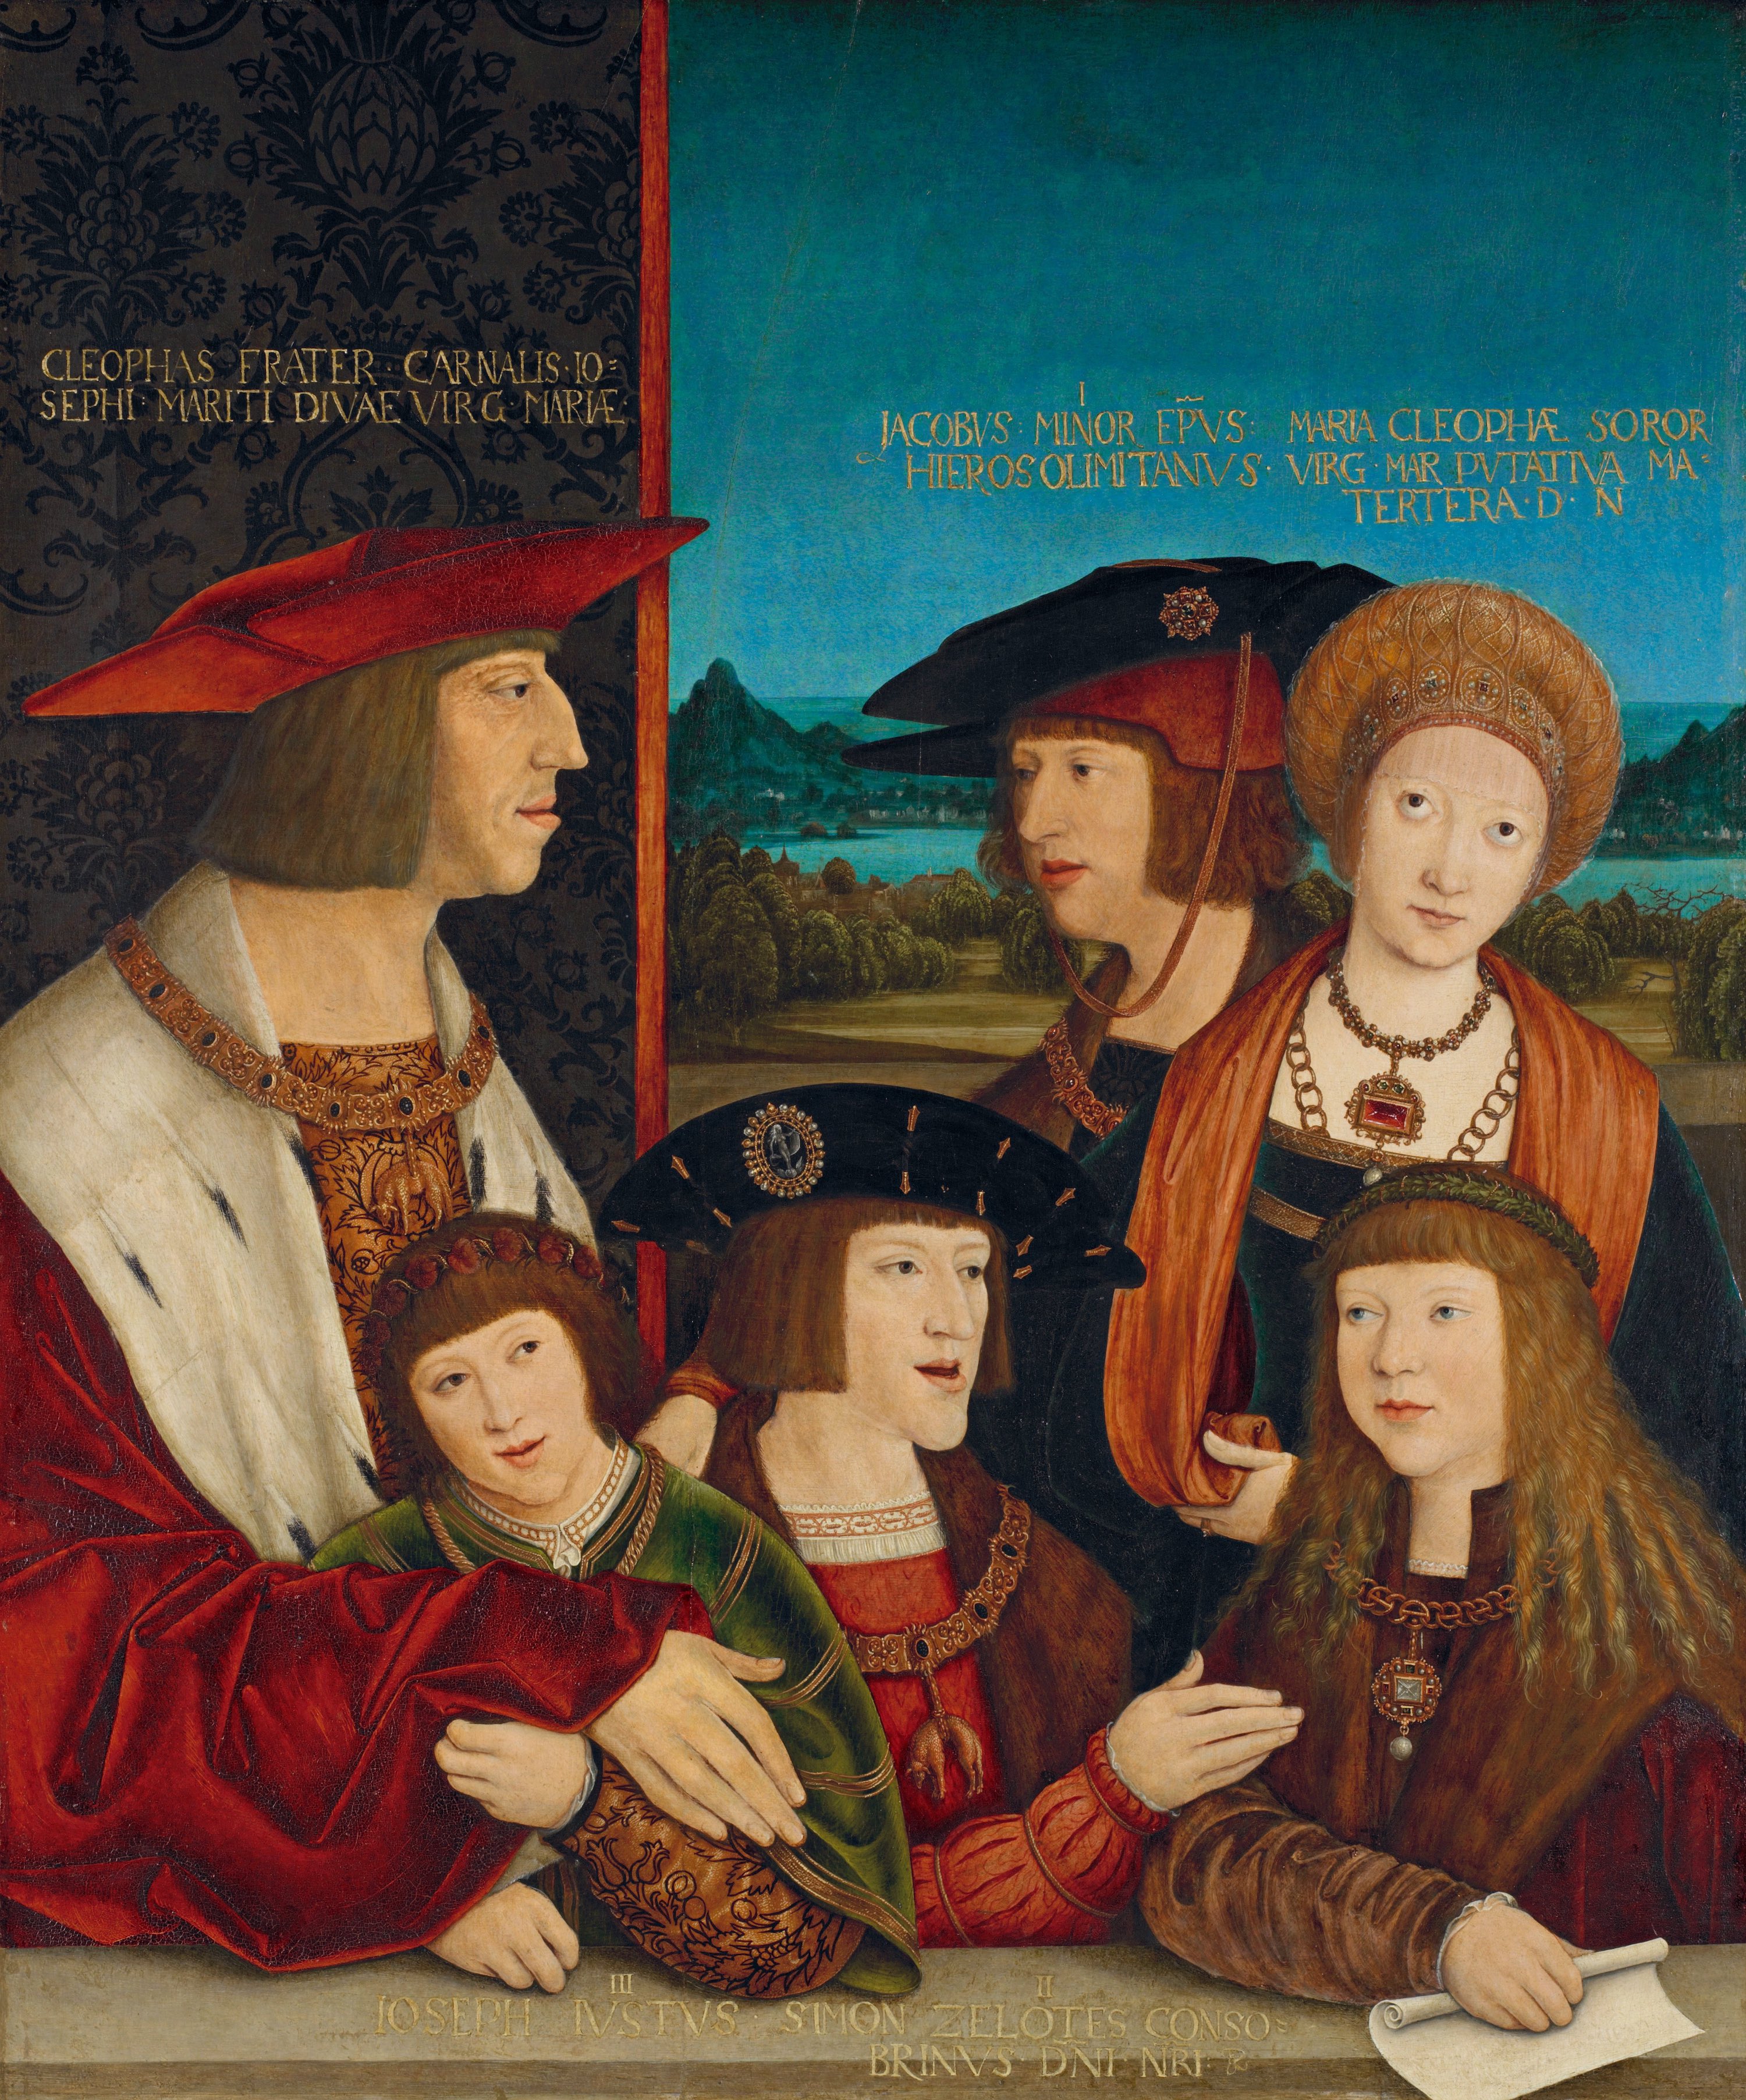 Emperor Maximilian I with His Family by Bernhard Strigel - 1516/1520 - 60.4 x 72.8 cm Kunsthistorisches Museum